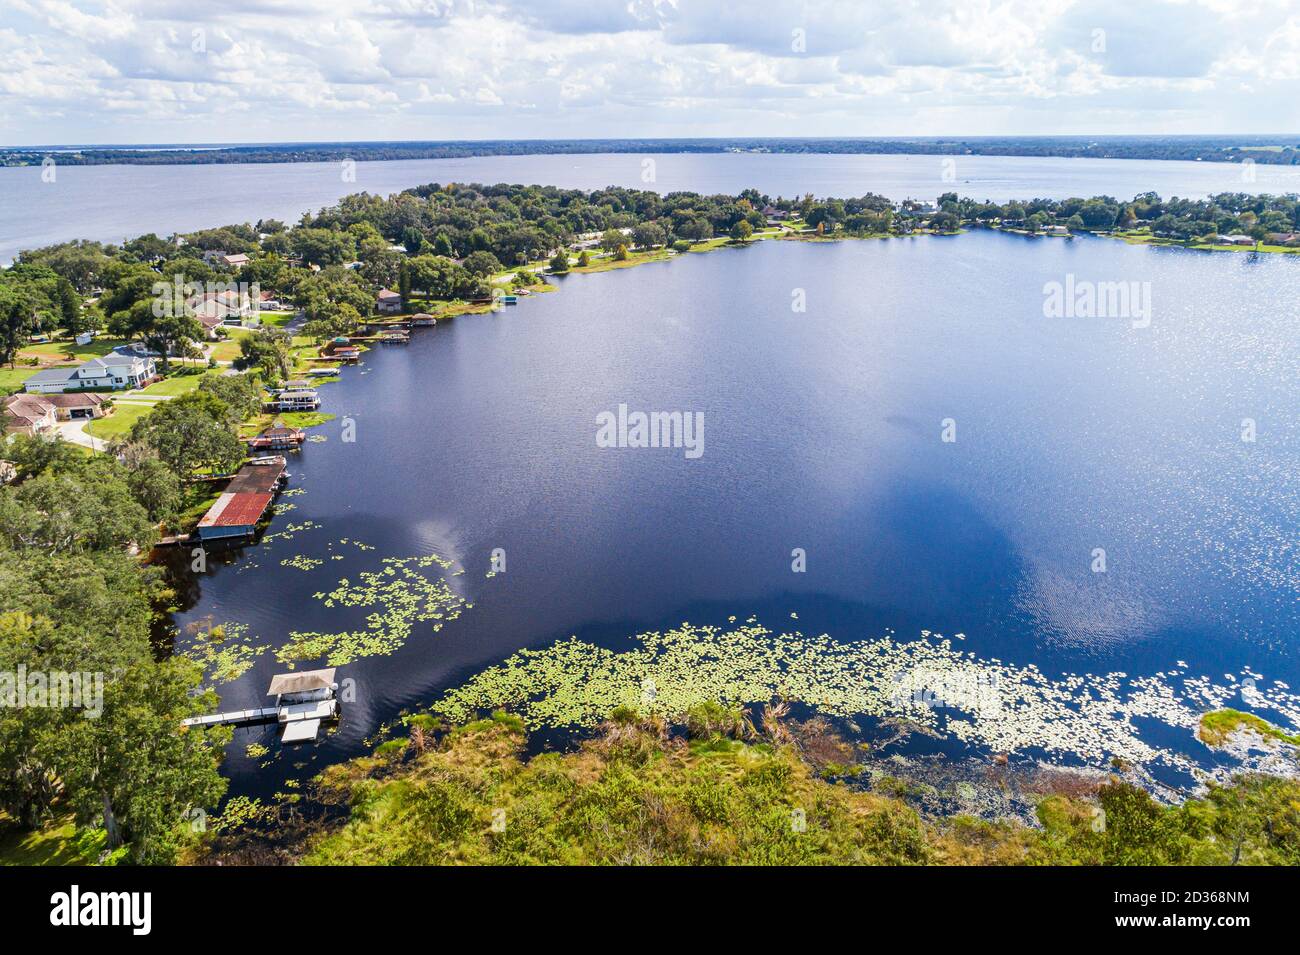 Florida,Clermont Chain of Lakes,Lake Winona,Lake Minnehaha beyond,waterfront houses,sinkhole wetlands natural scenery,aerial overhead bird's eye view Stock Photo